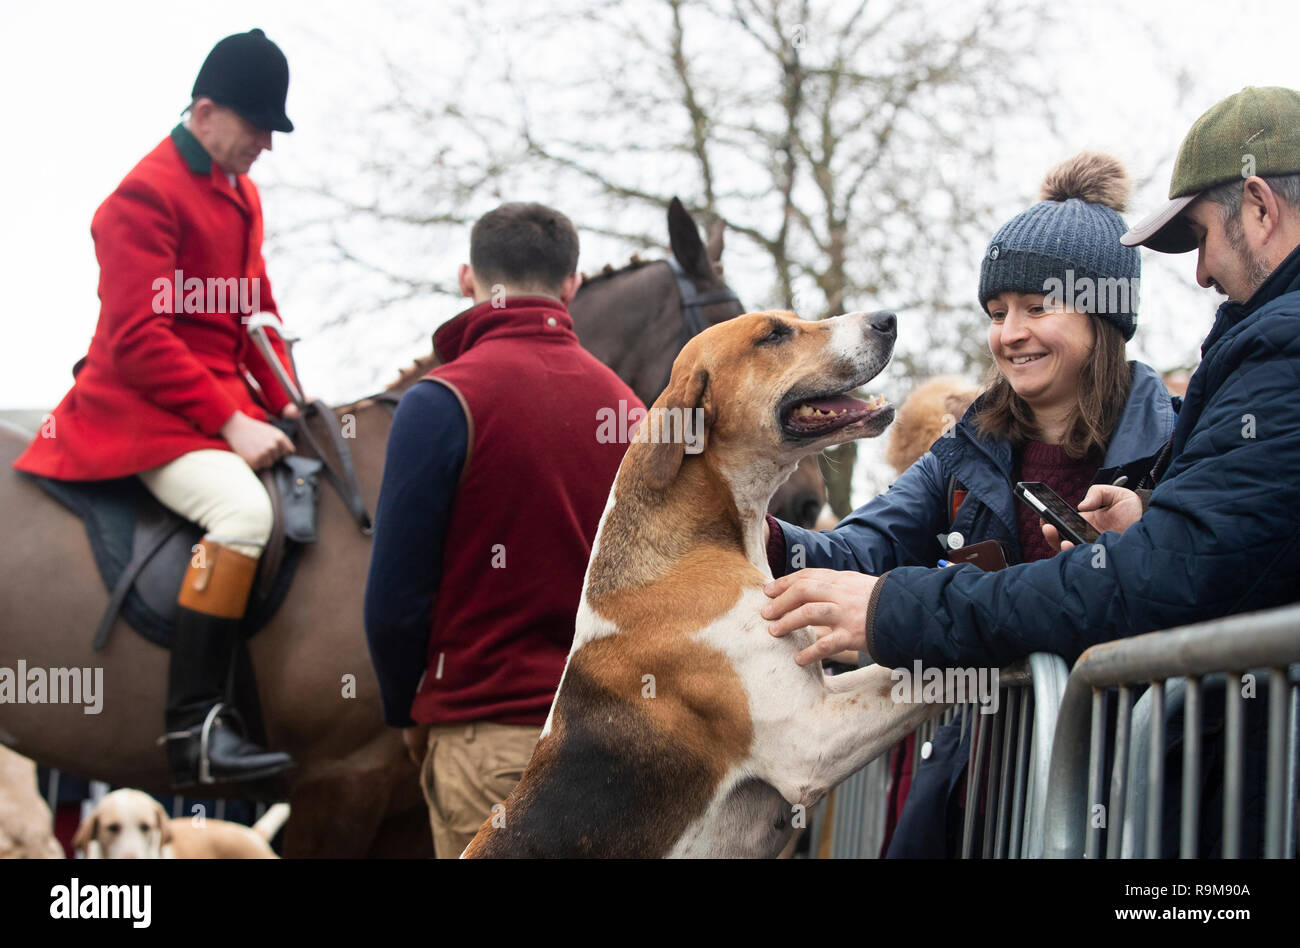 Members of the public pet a hound ahead of the Grove and Rufford Hunt, formed in 1952, setting off from Bawtry in South Yorkshire as hundreds of packs across the country meet for traditional Boxing Day hunts. Stock Photo